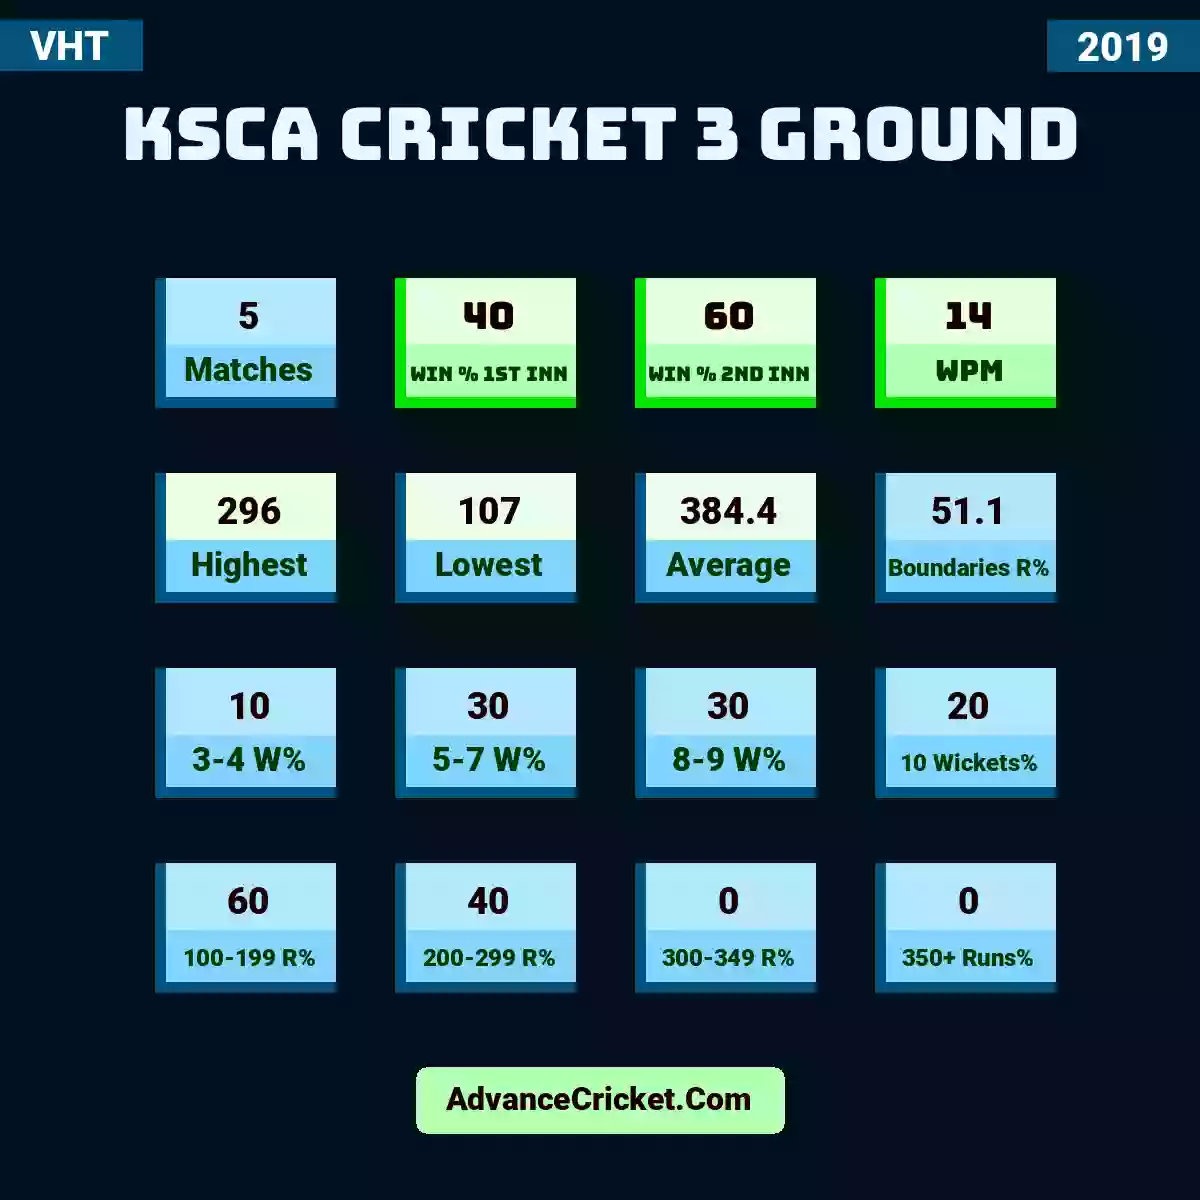 Image showing KSCA Cricket 3 Ground with Matches: 5, Win % 1st Inn: 40, Win % 2nd Inn: 60, WPM: 14, Highest: 296, Lowest: 107, Average: 384.4, Boundaries R%: 51.1, 3-4 W%: 10, 5-7 W%: 30, 8-9 W%: 30, 10 Wickets%: 20, 100-199 R%: 60, 200-299 R%: 40, 300-349 R%: 0, 350+ Runs%: 0.